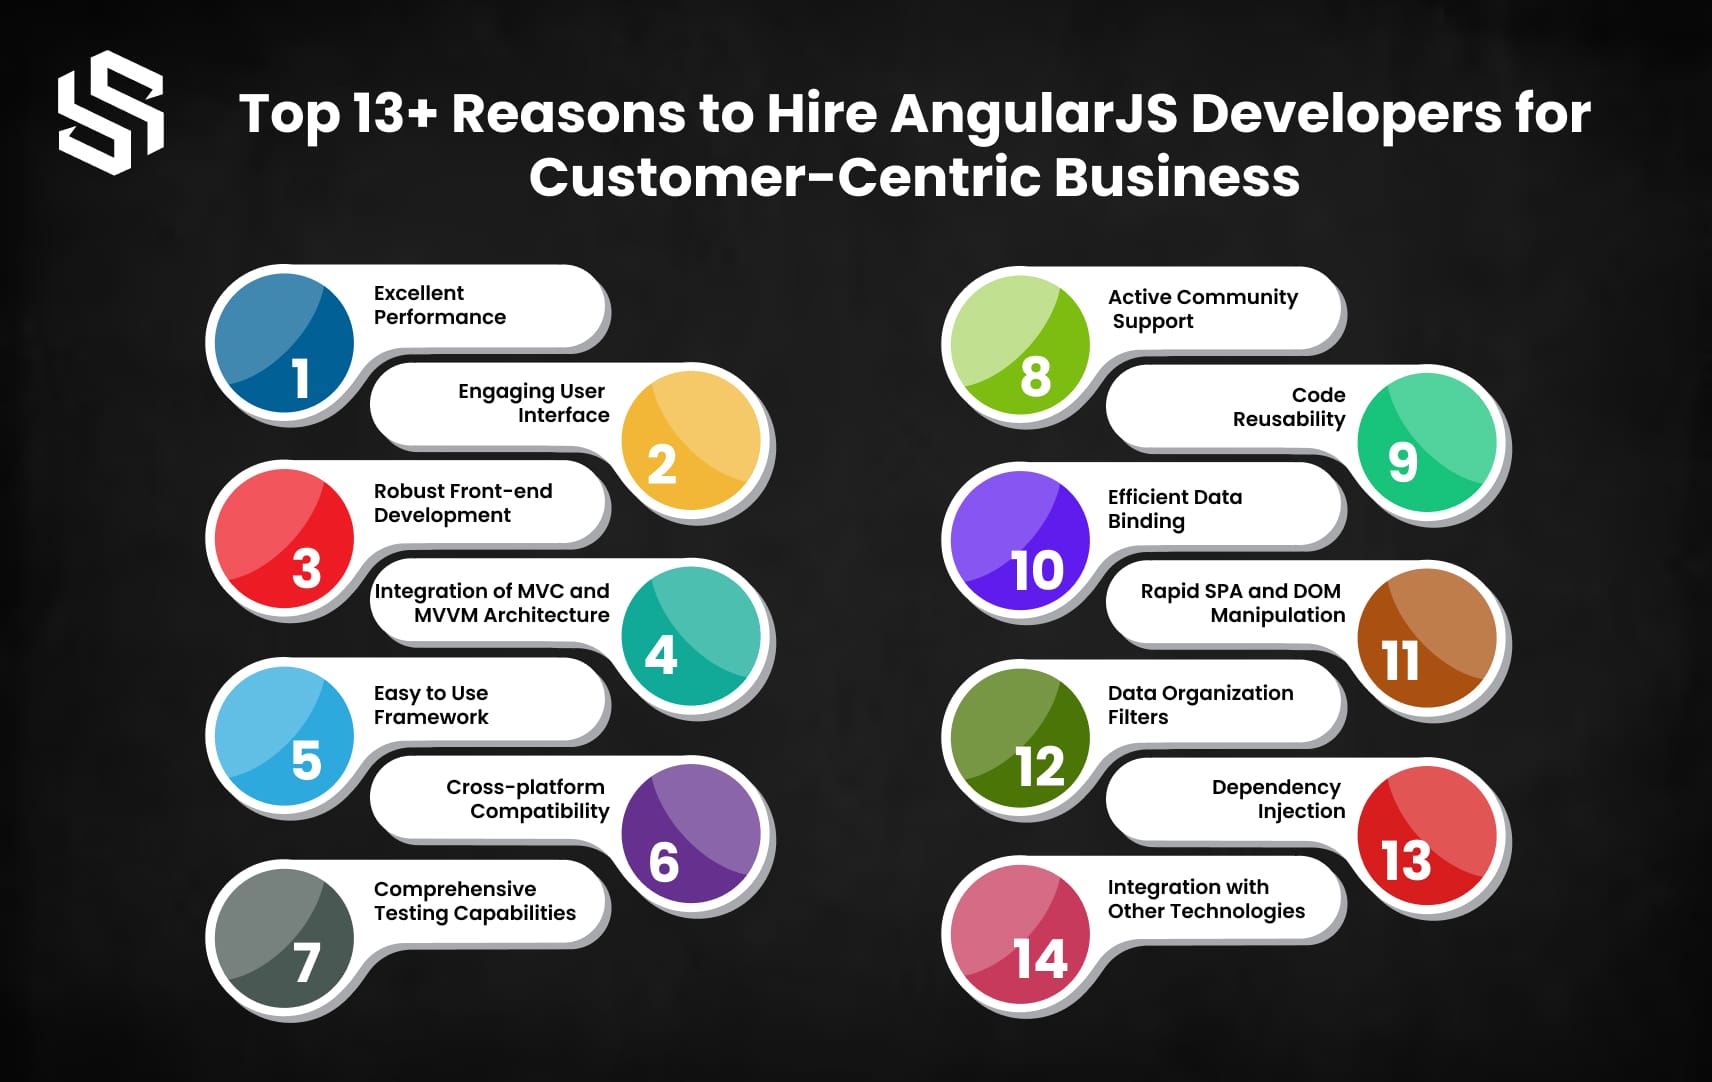 Top 13+ Reasons to Hire AngularJS Developers for Customer-Centric Business